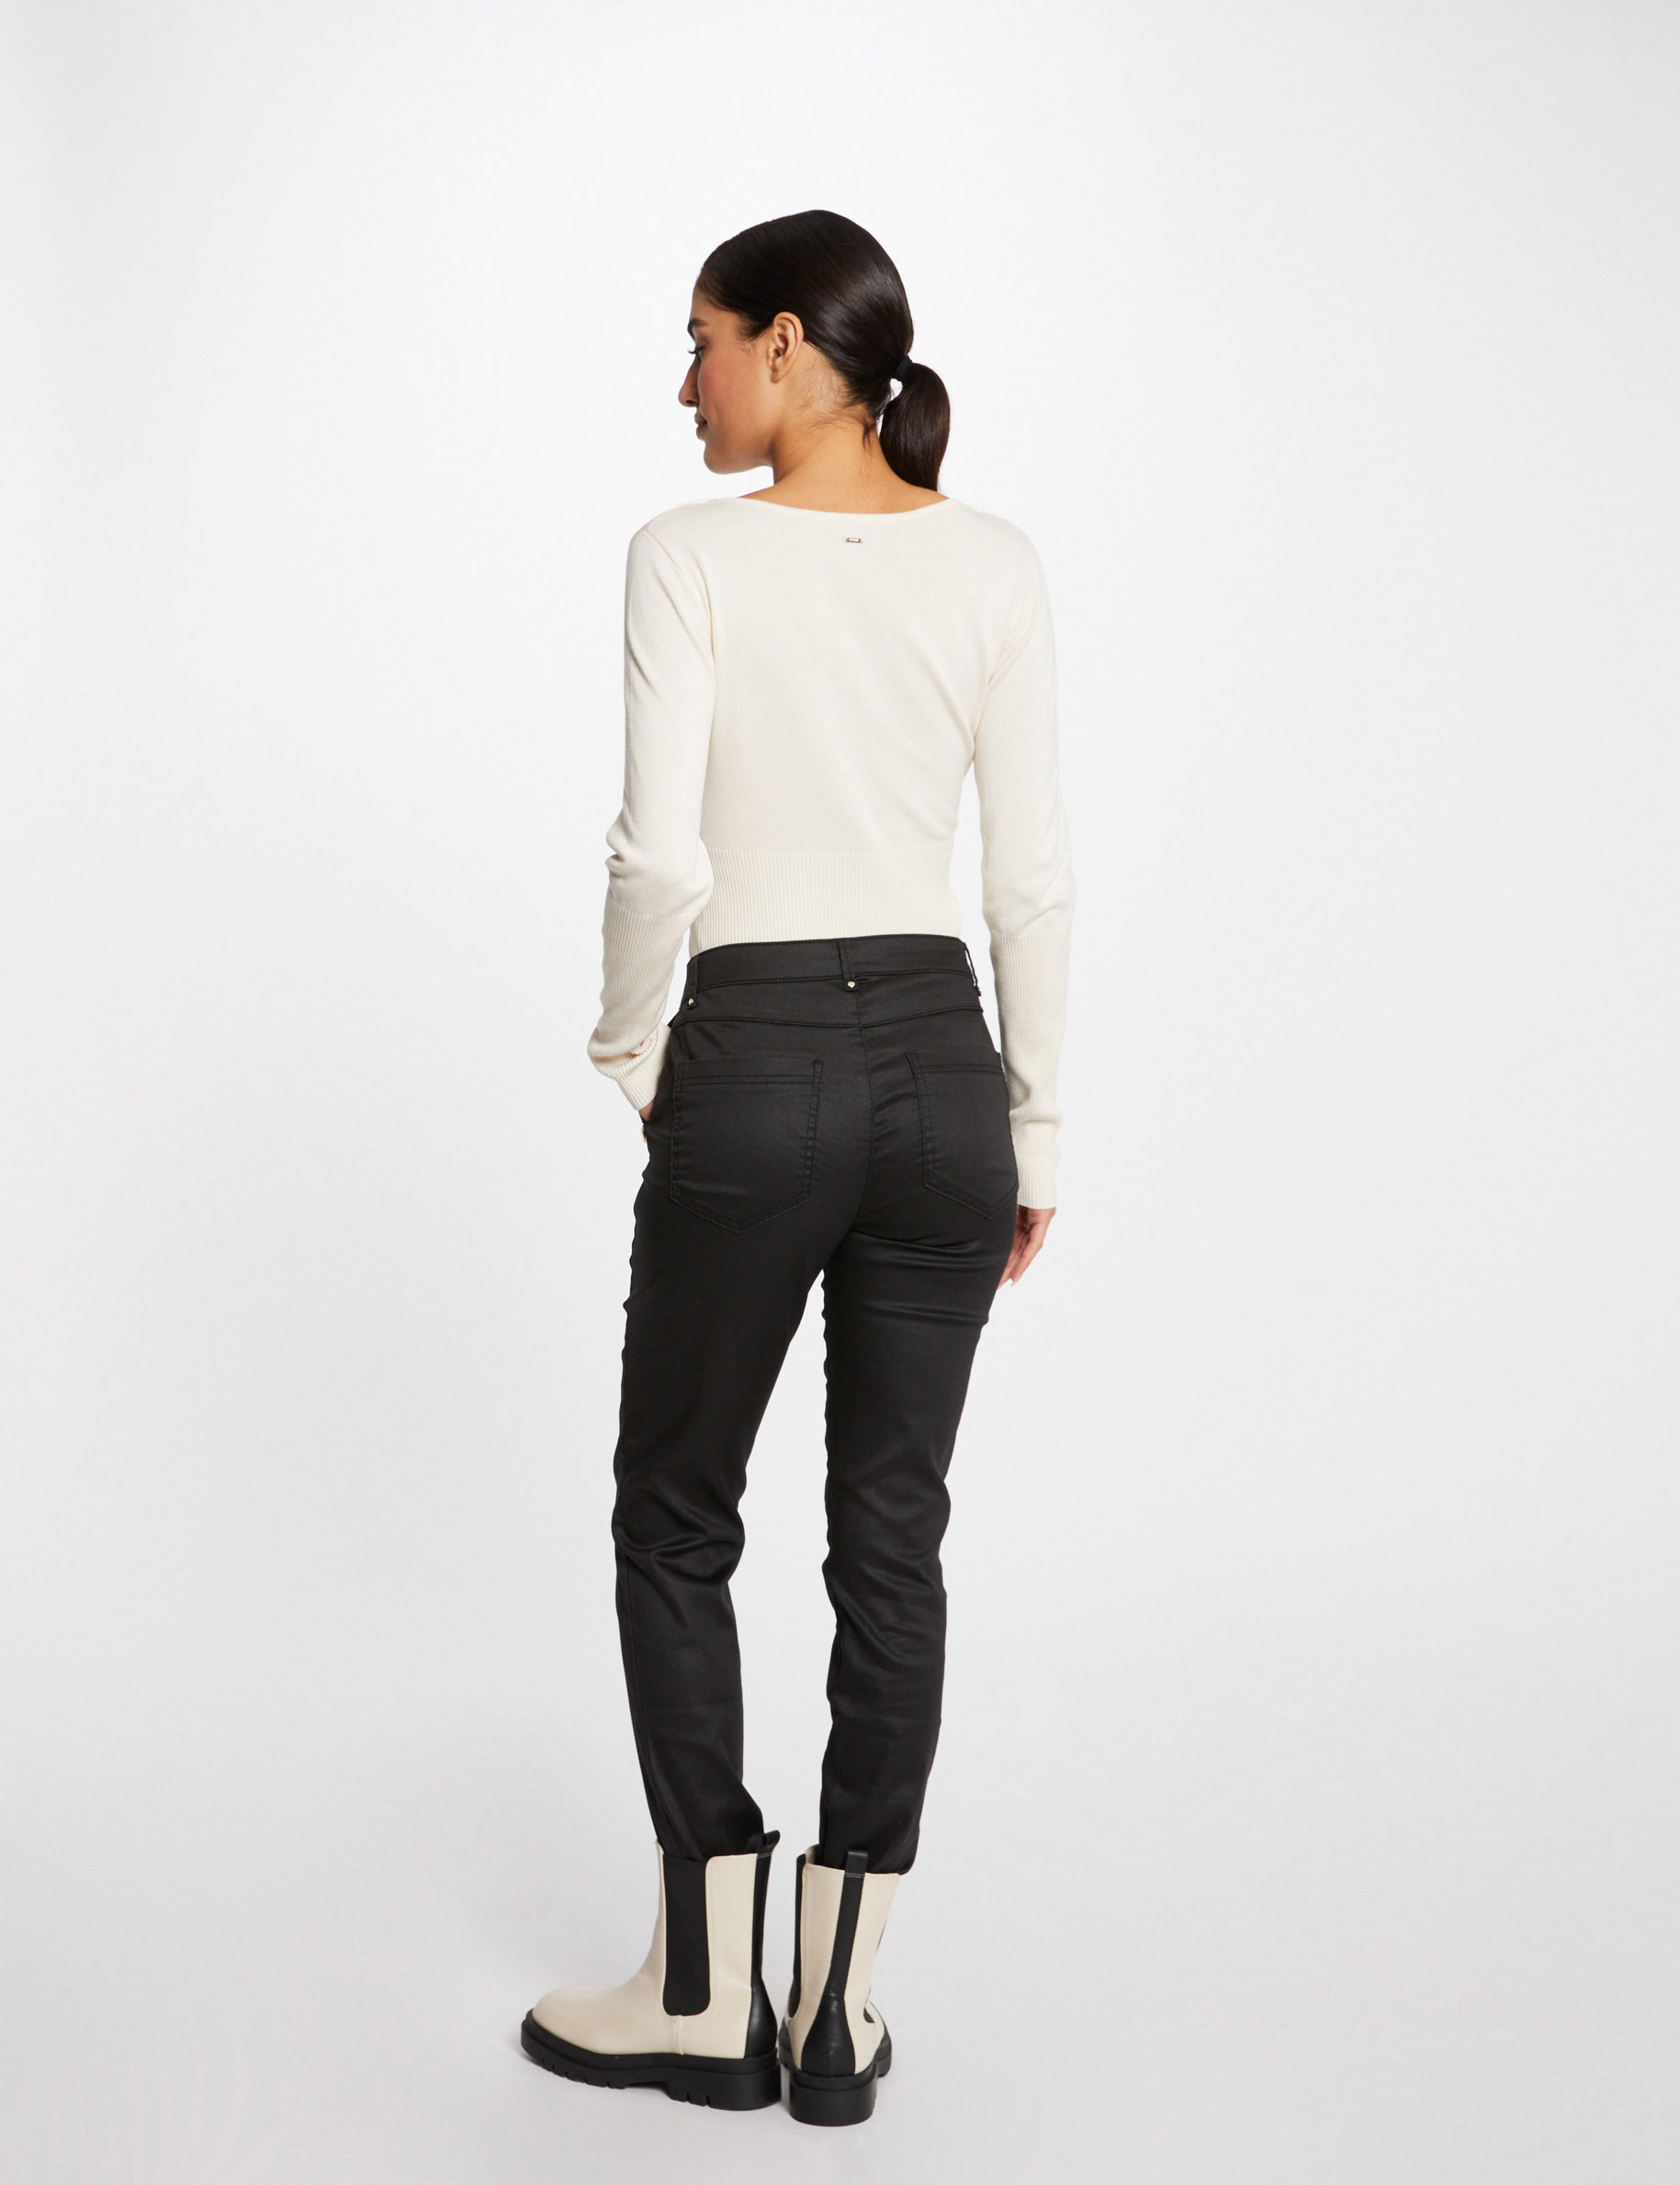 Slim trousers wet effect with buttons black ladies'